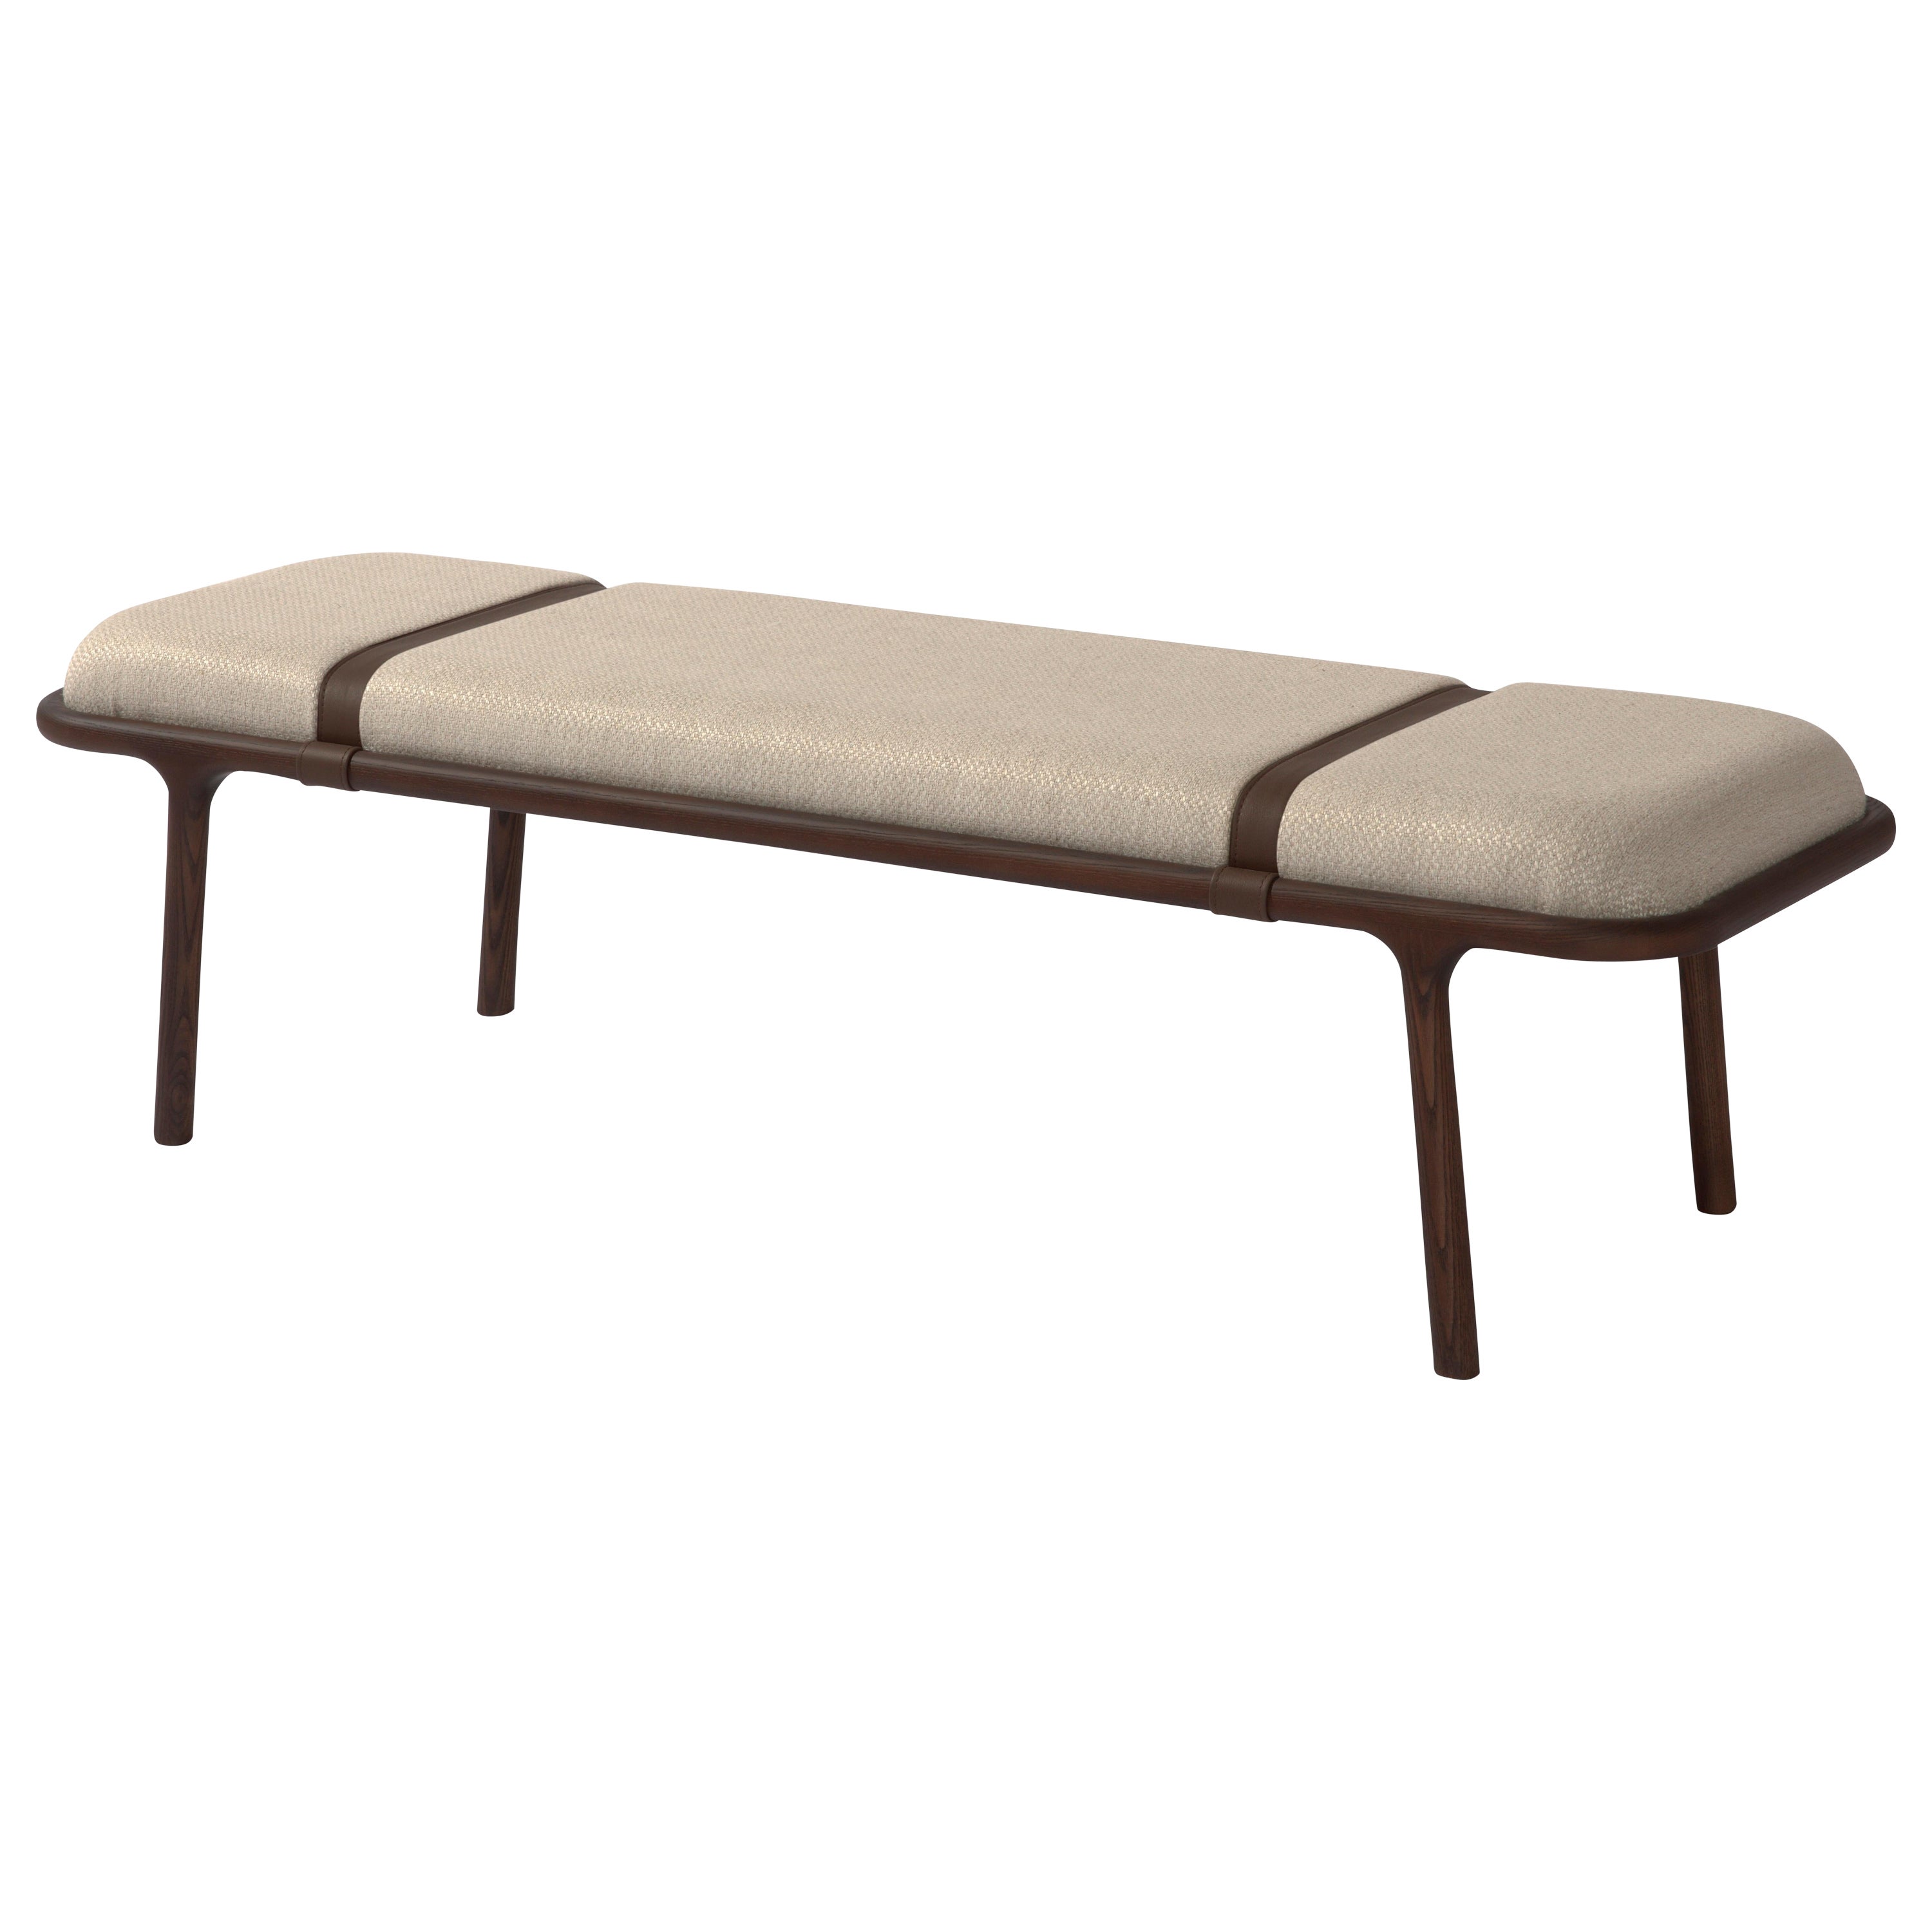 Belts Carpanese Home Italia Bench with Massive Wooden Base Modern 21st Century